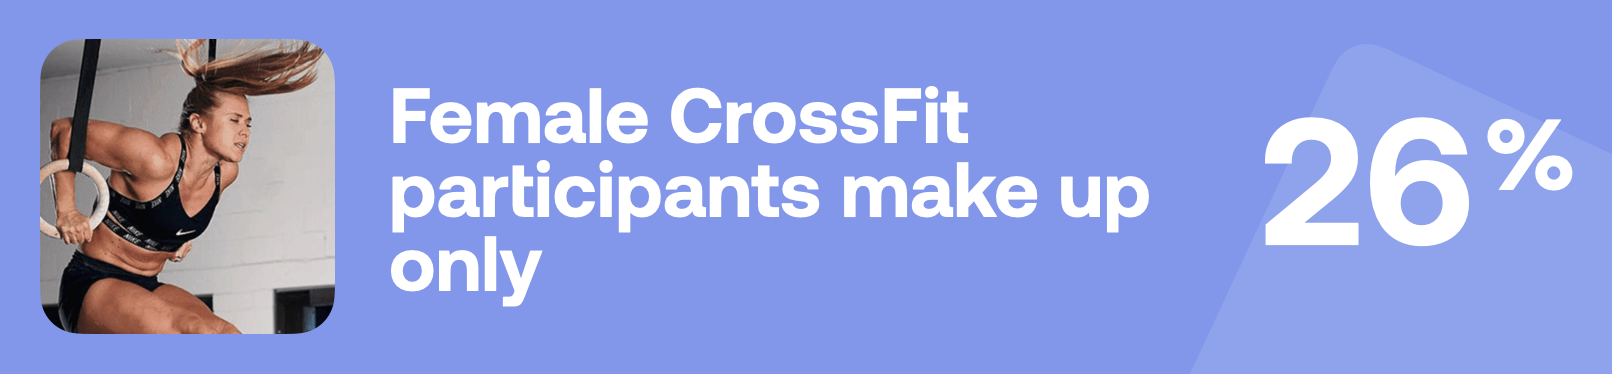 Female CrossFit participants make up only 26%